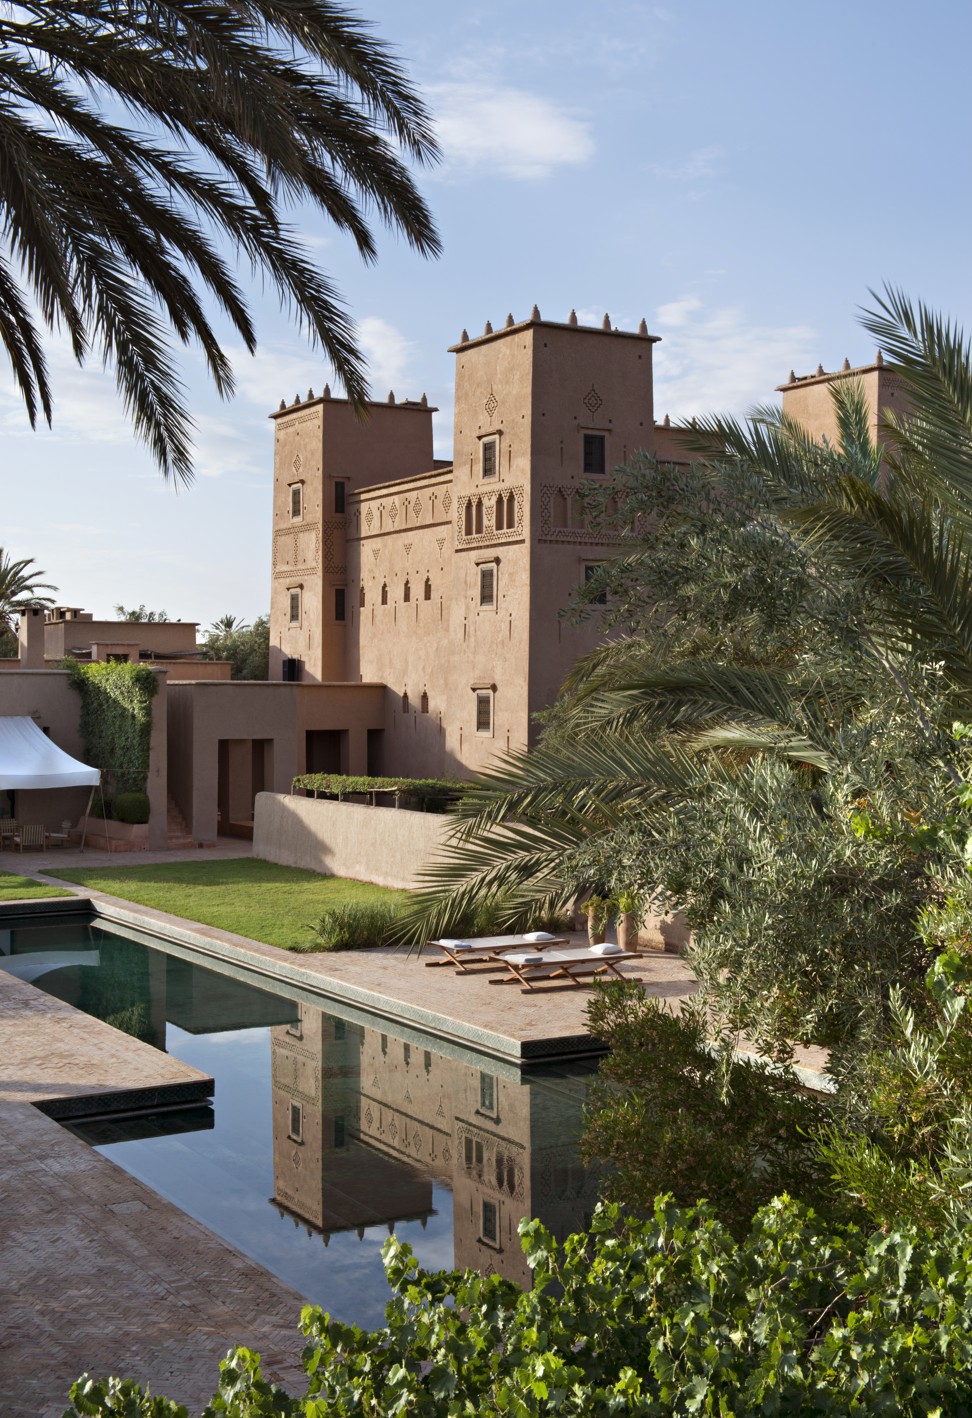 Lo-tech luxury meets 200-year-old traditional Moroccan kasbah at Dar Ahlam.